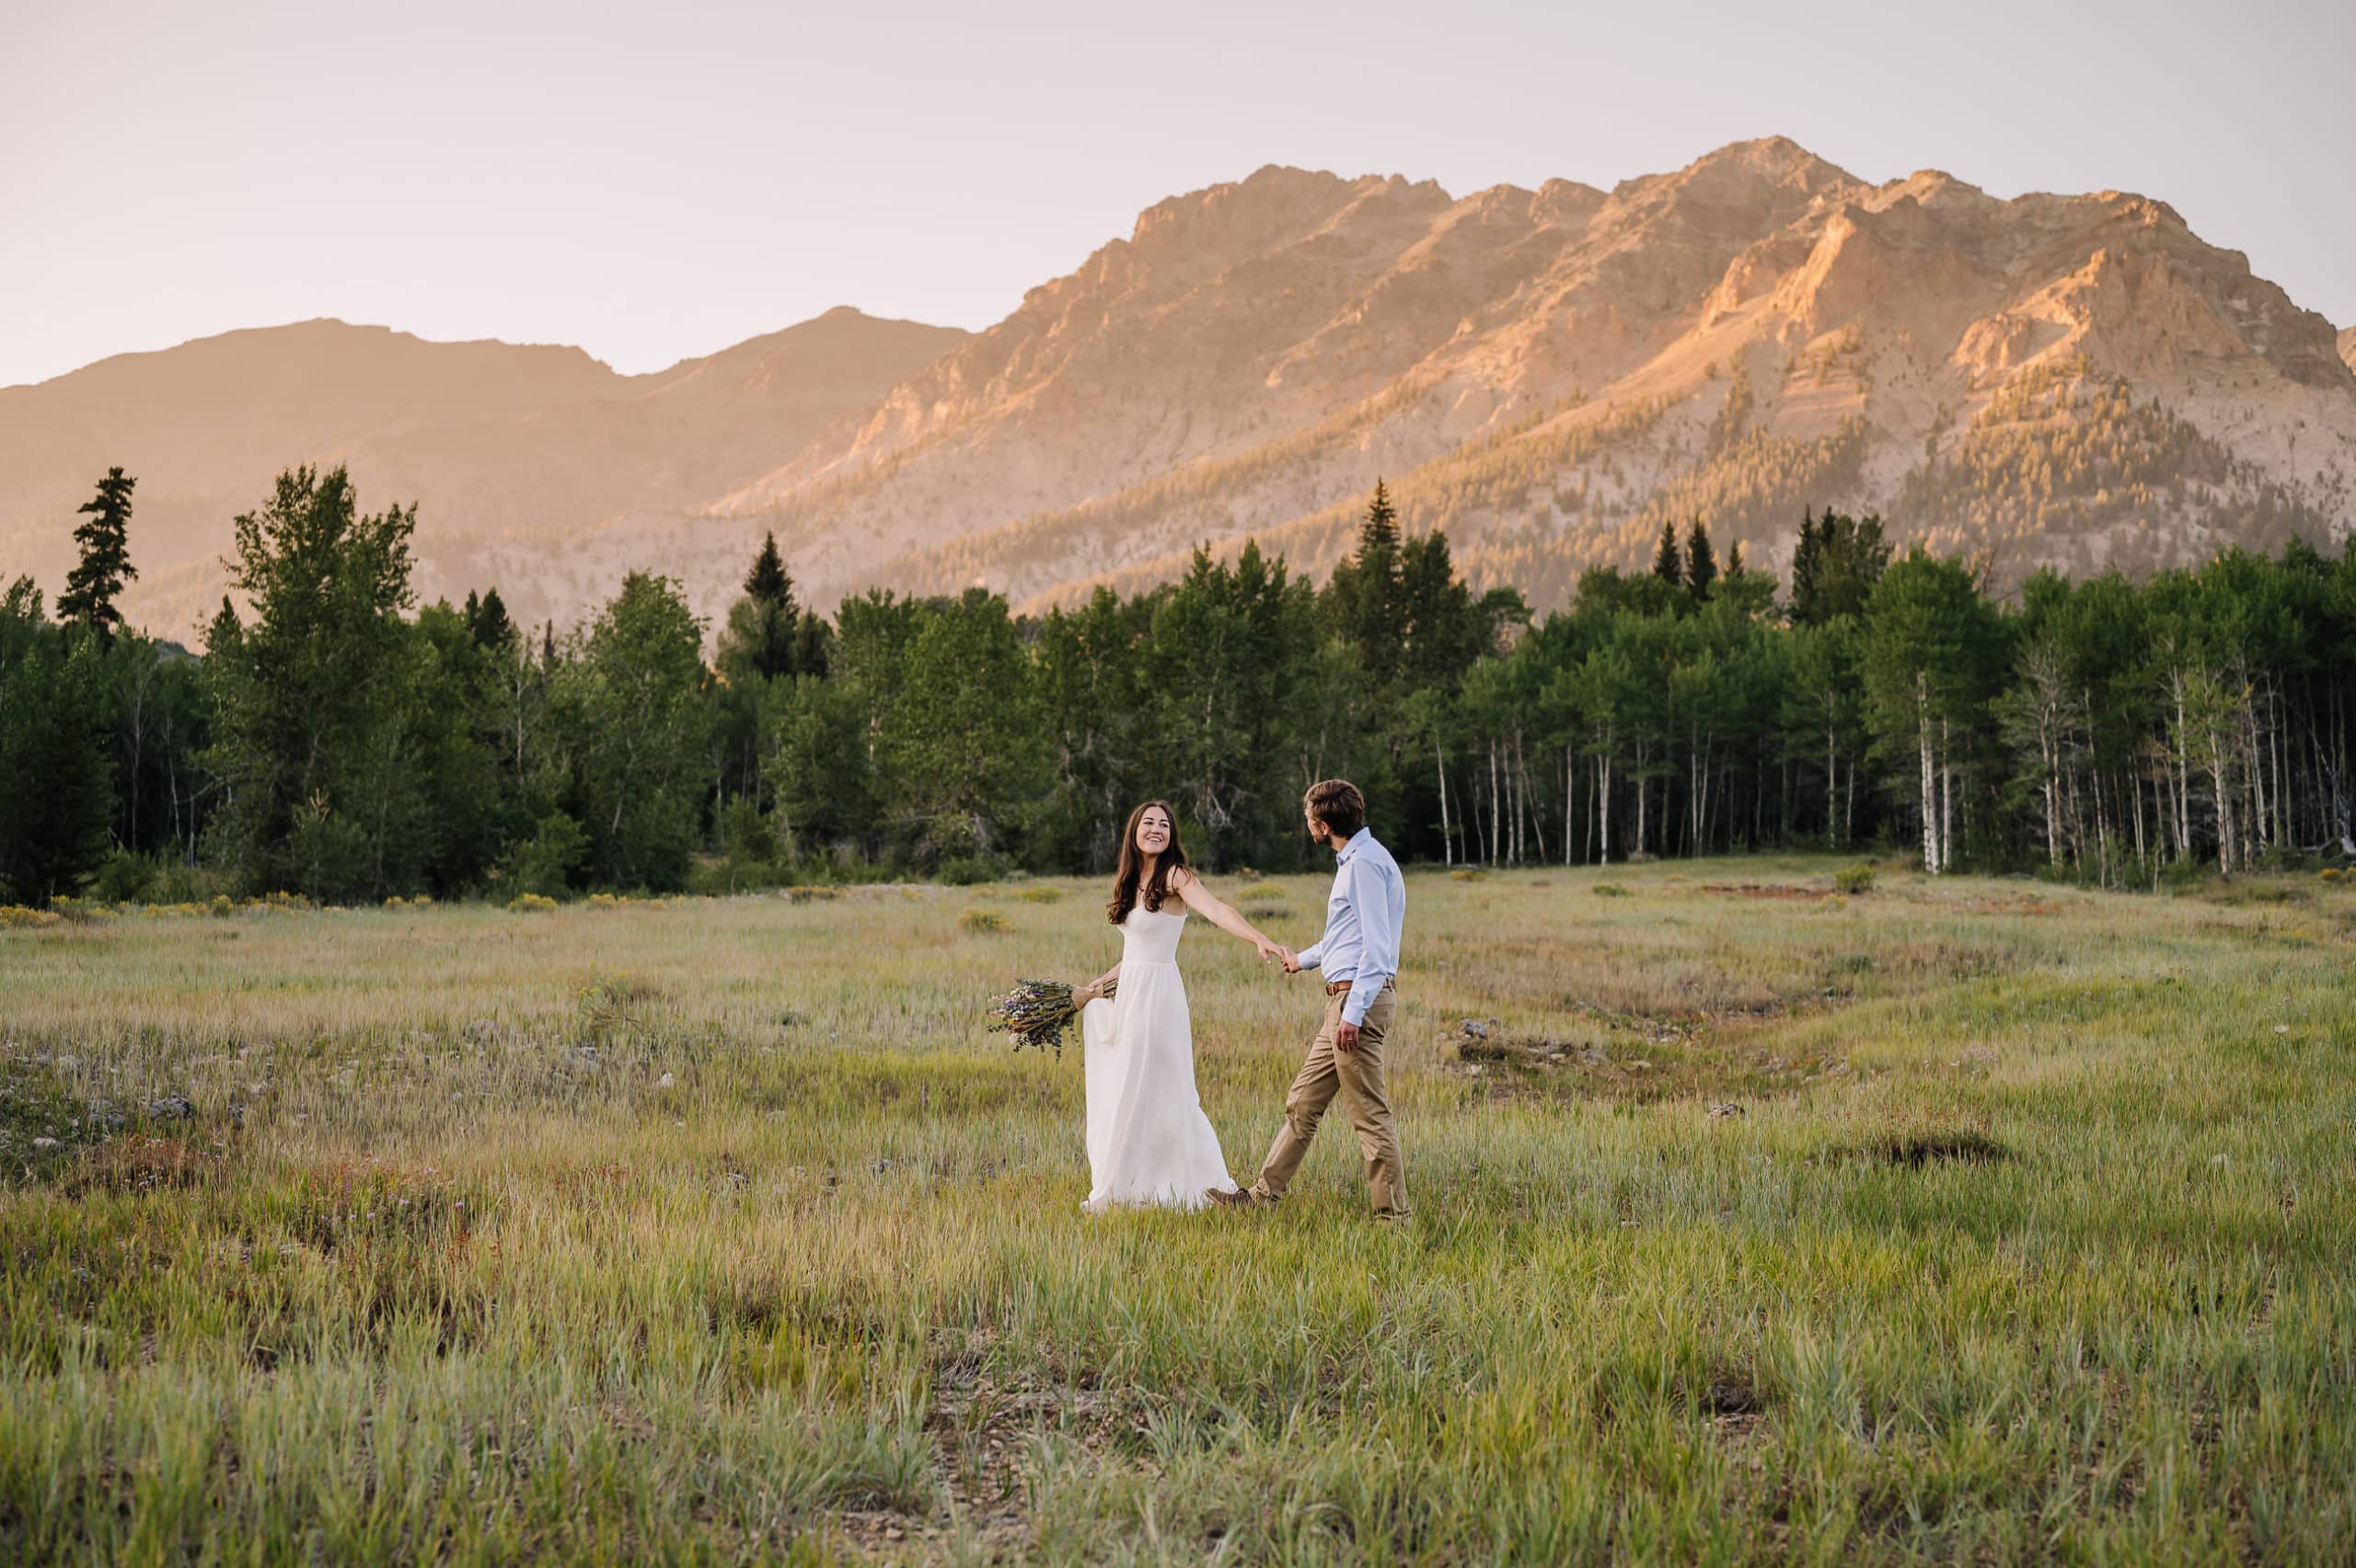 Couple walks across a meadow at sunset during their Sun Valley elopement. Bride is holding her groom's hand and looking back at him smiling. The setting sun is casting an alpenglow on the mountains behind the couple.